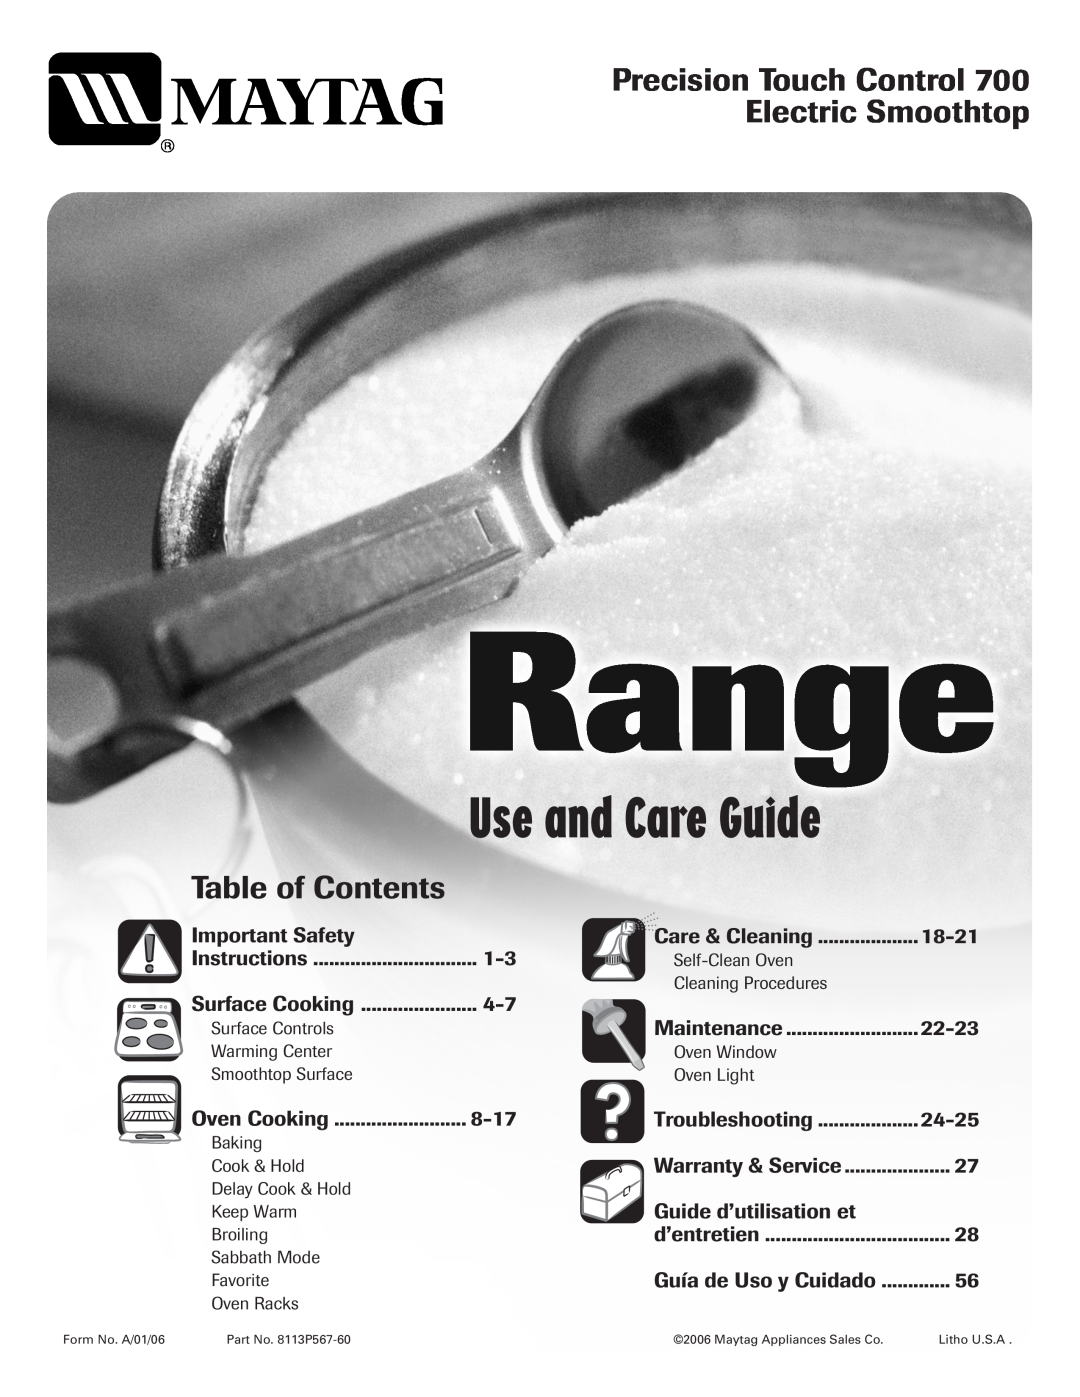 Maytag Range important safety instructions Use and Care Guide, Precision Touch Control Electric Smoothtop 